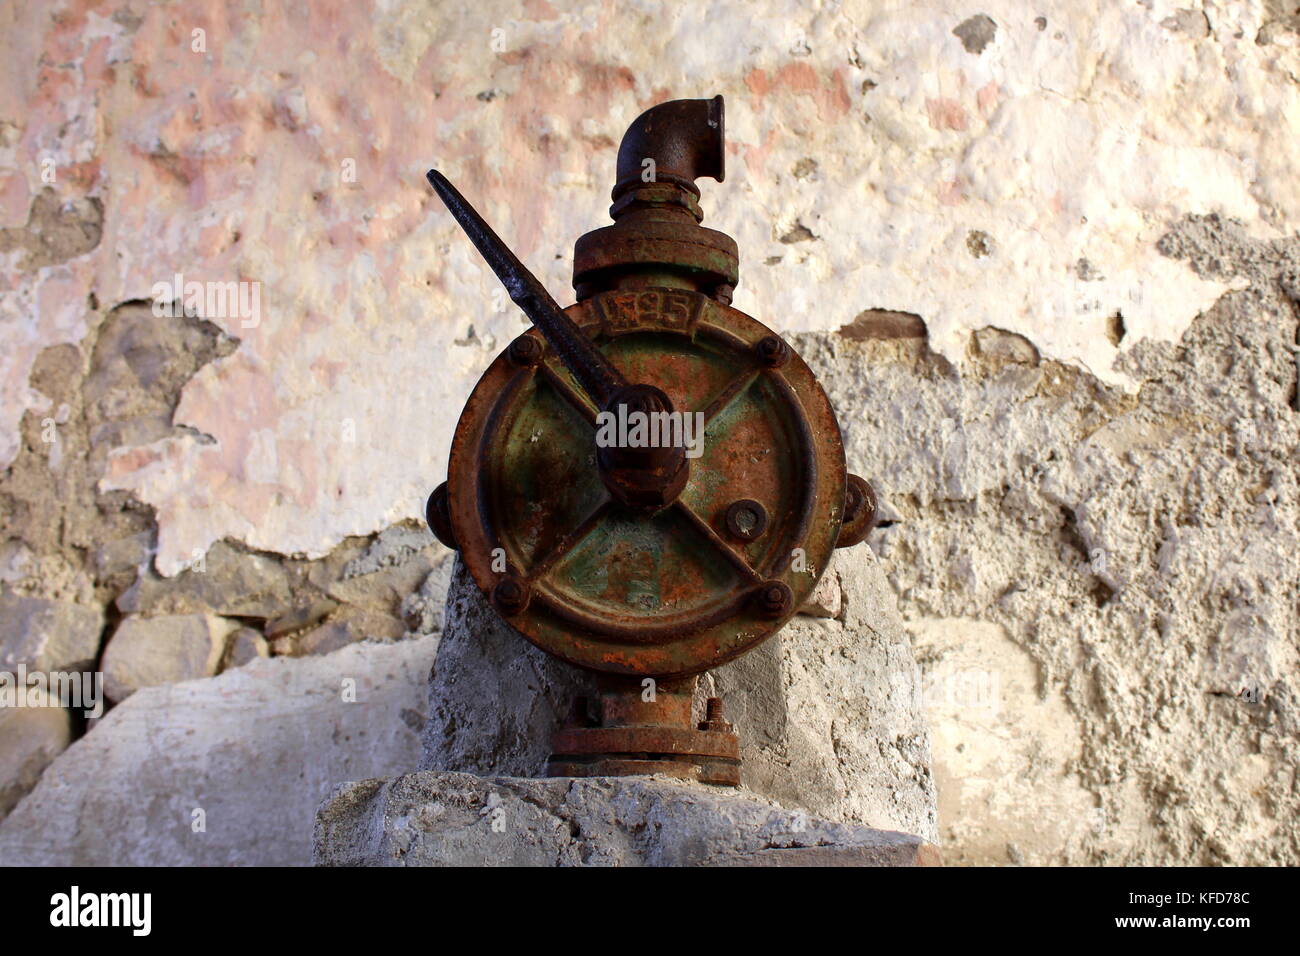 Old and completely rusted traditional water valve for hand pumps installed at town squares in front of stone wall Stock Photo